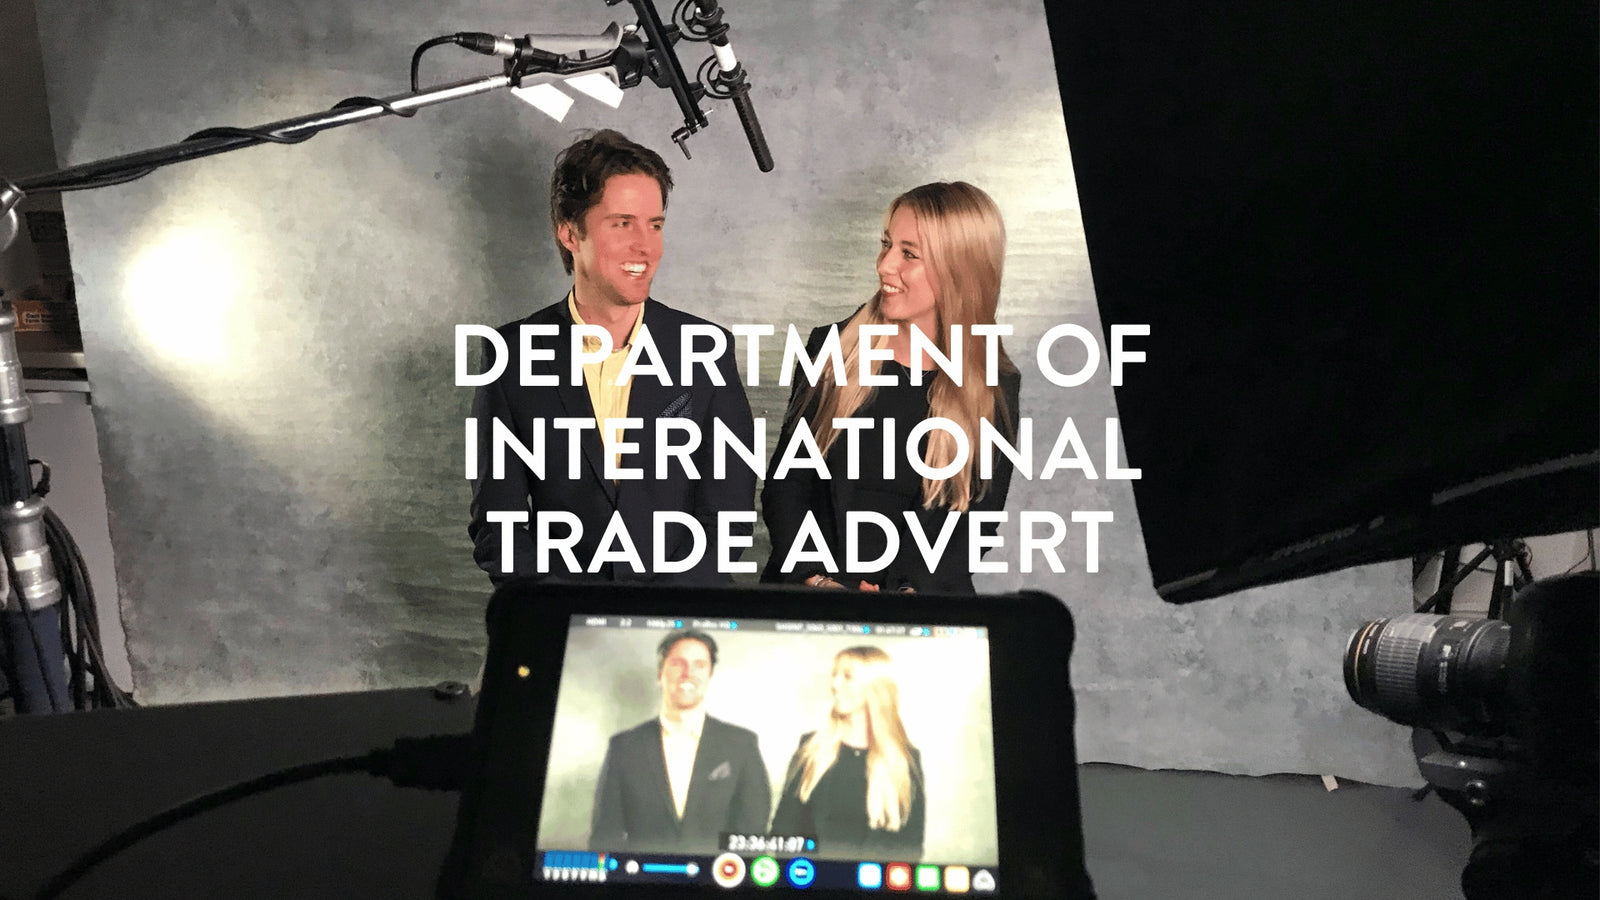 See Us In Online TV Ad's Soon! Our Export Journey | Putnams